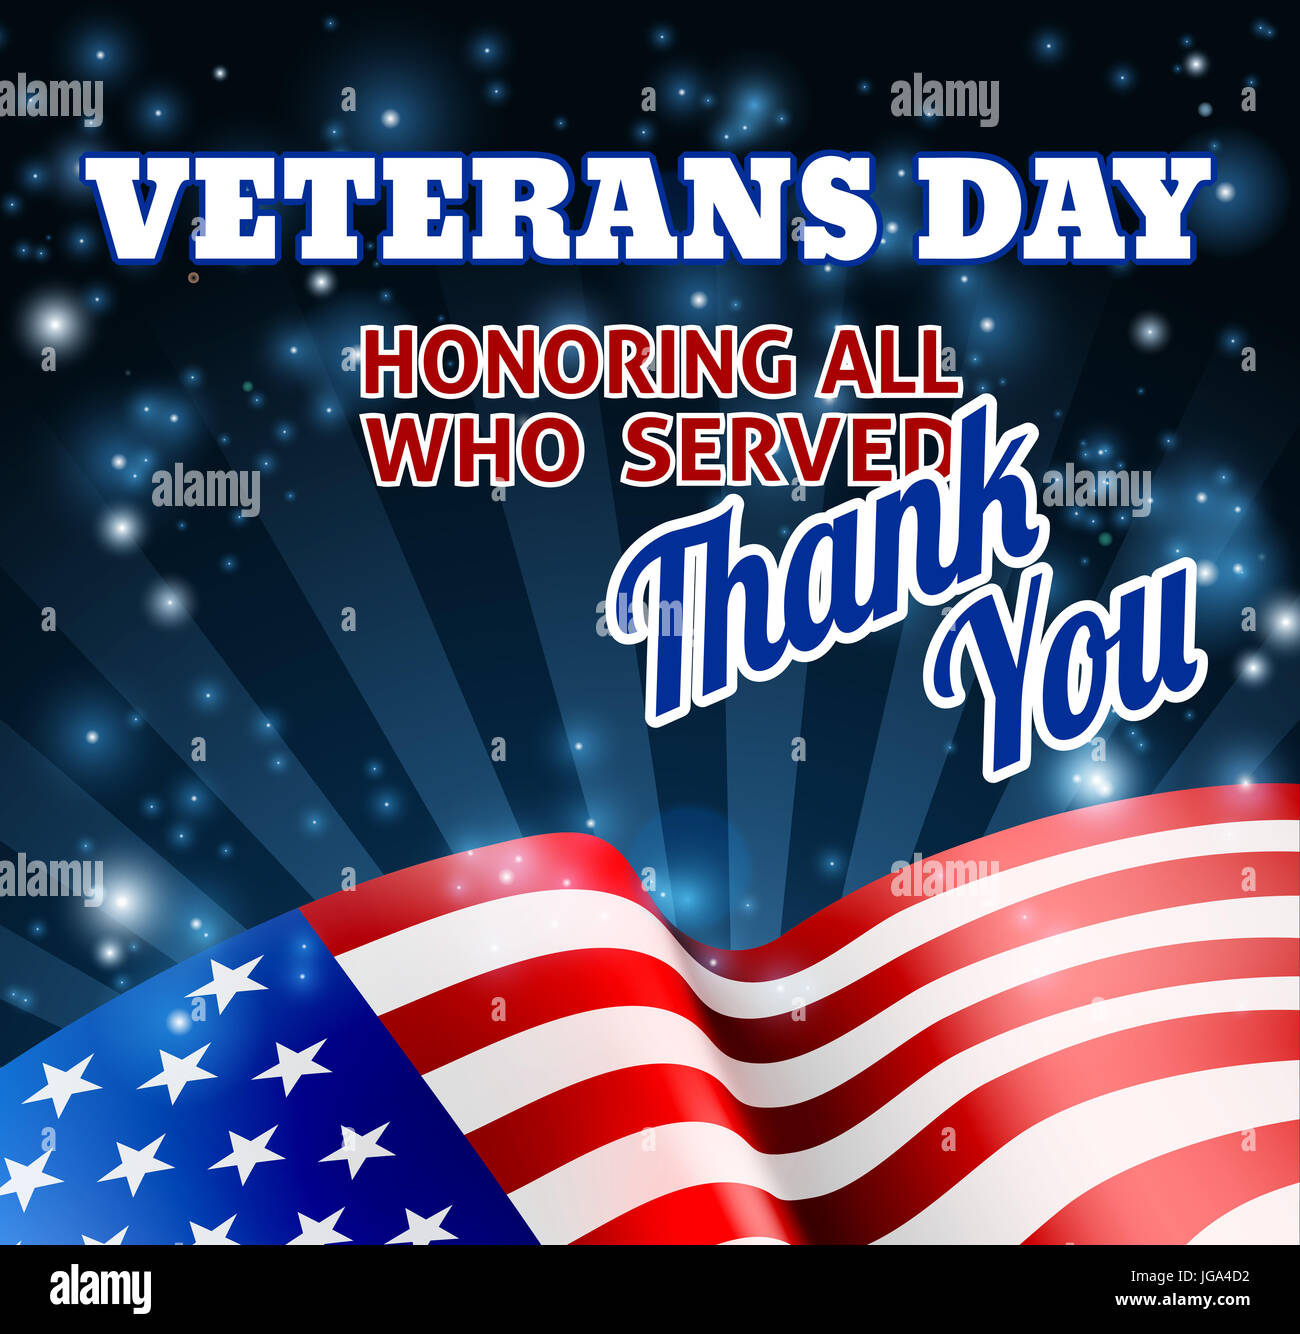 A Veterans Day background with an American Flag and Thank You message Stock Photo